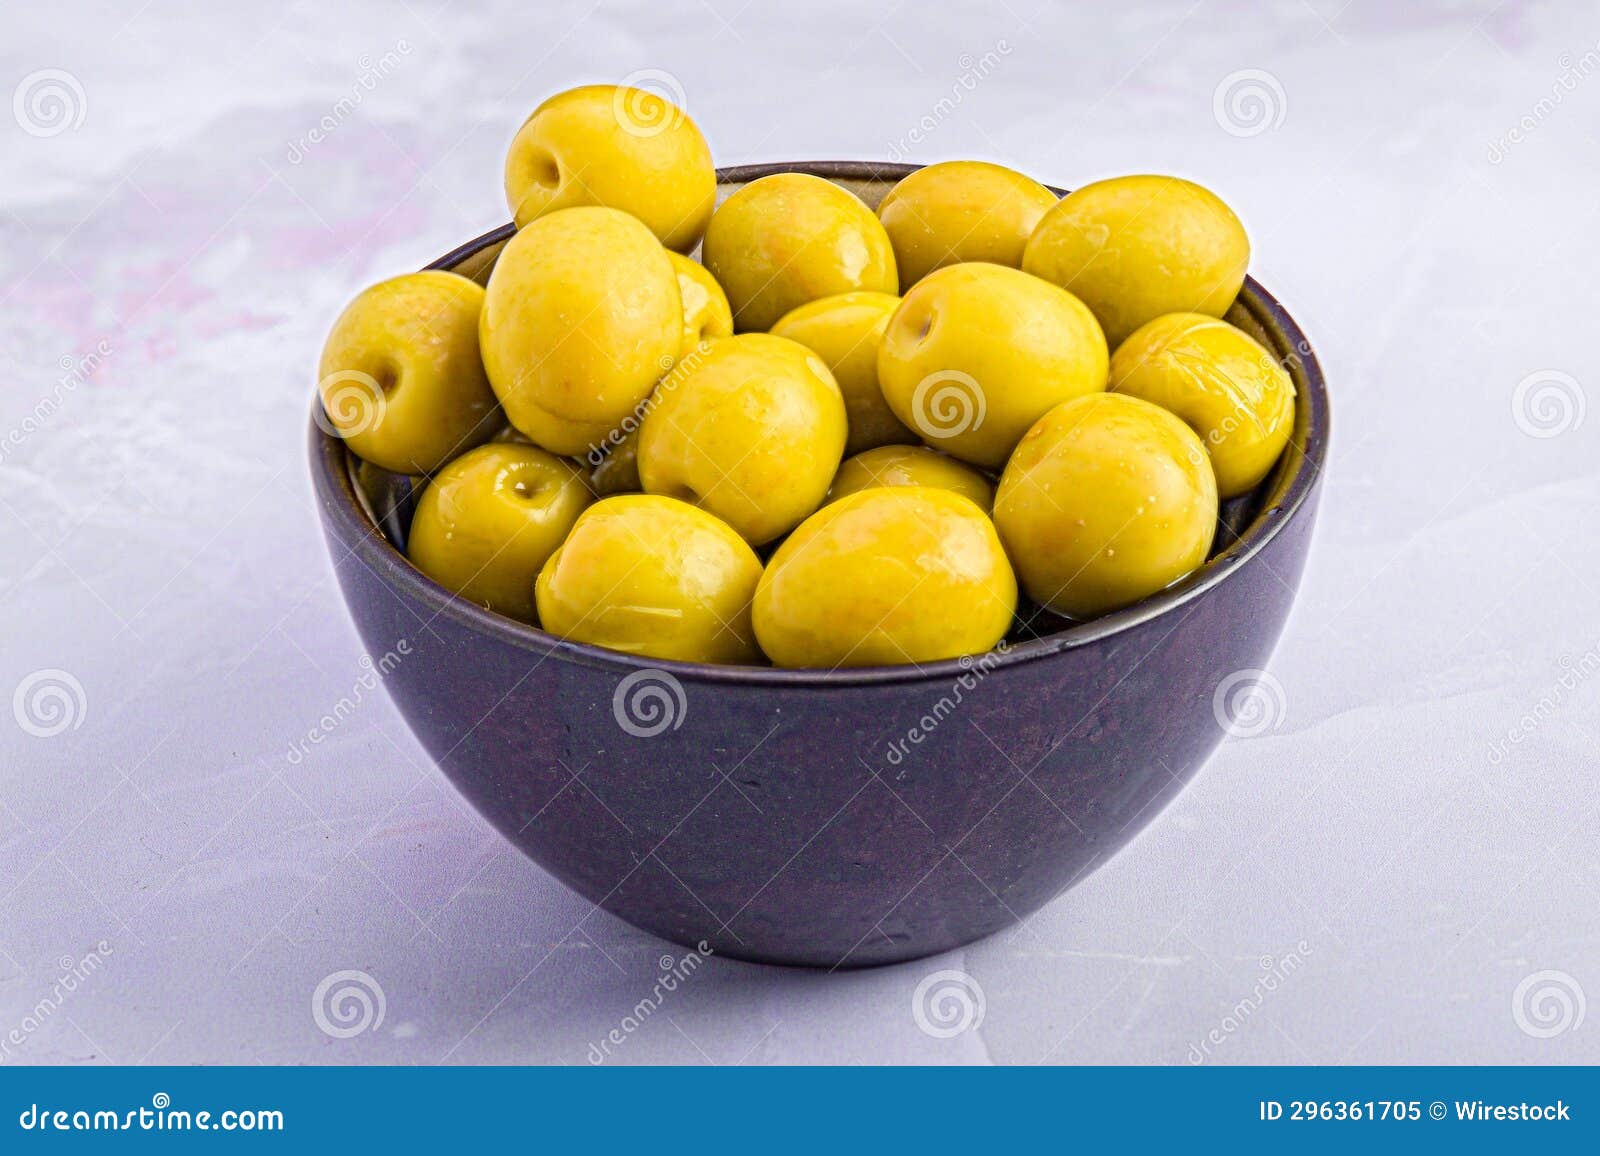 white table featuring a bowl filled with bright manzanilla olives